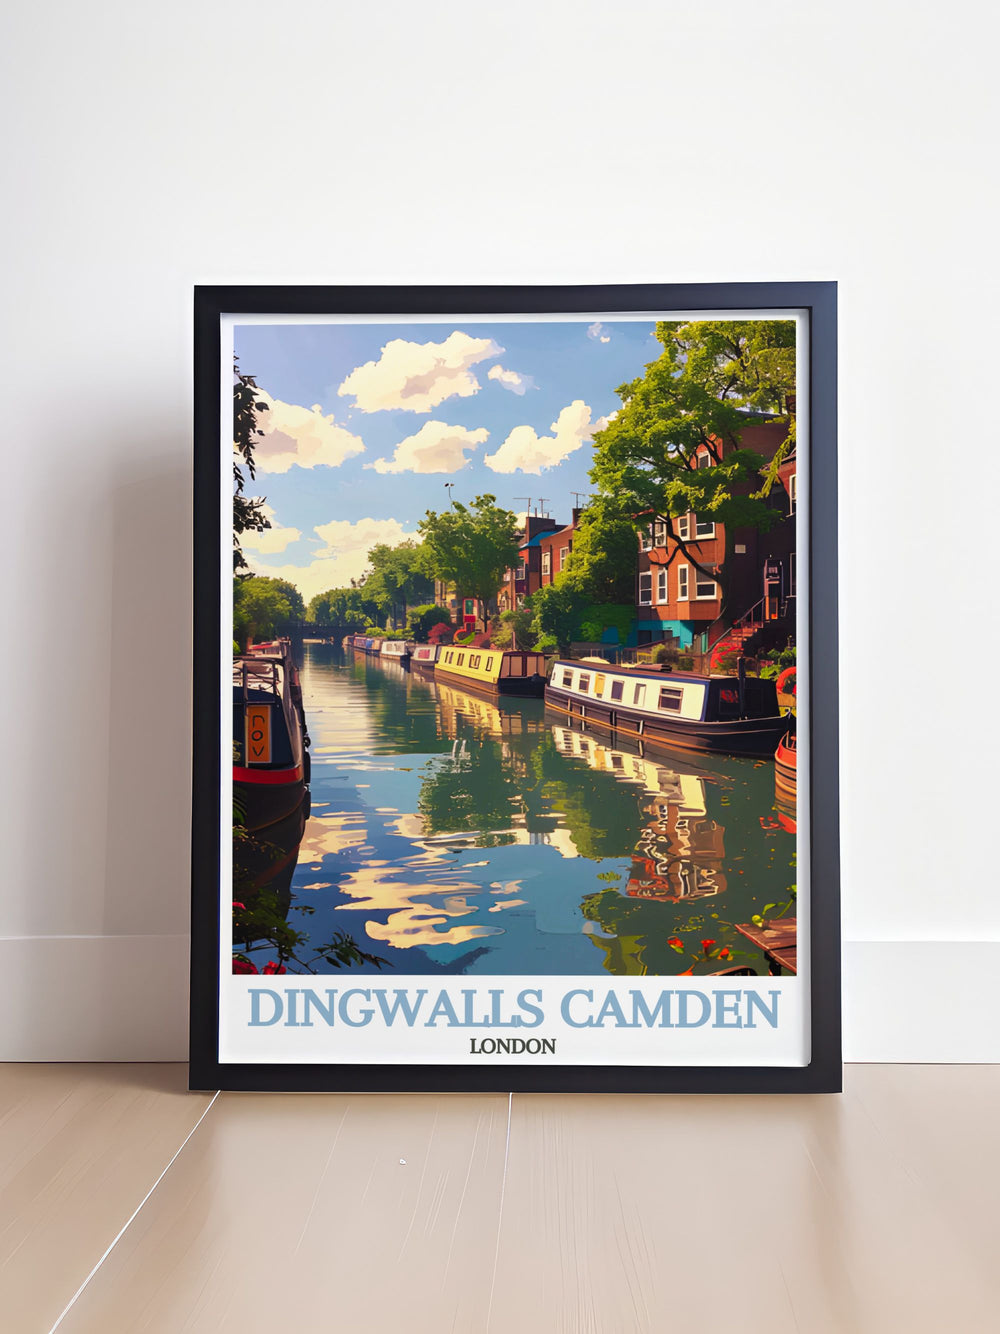 Featuring the serene Regents Canal, this art print captures the peaceful waterway and its lush surroundings, perfect for bringing tranquility to any space.